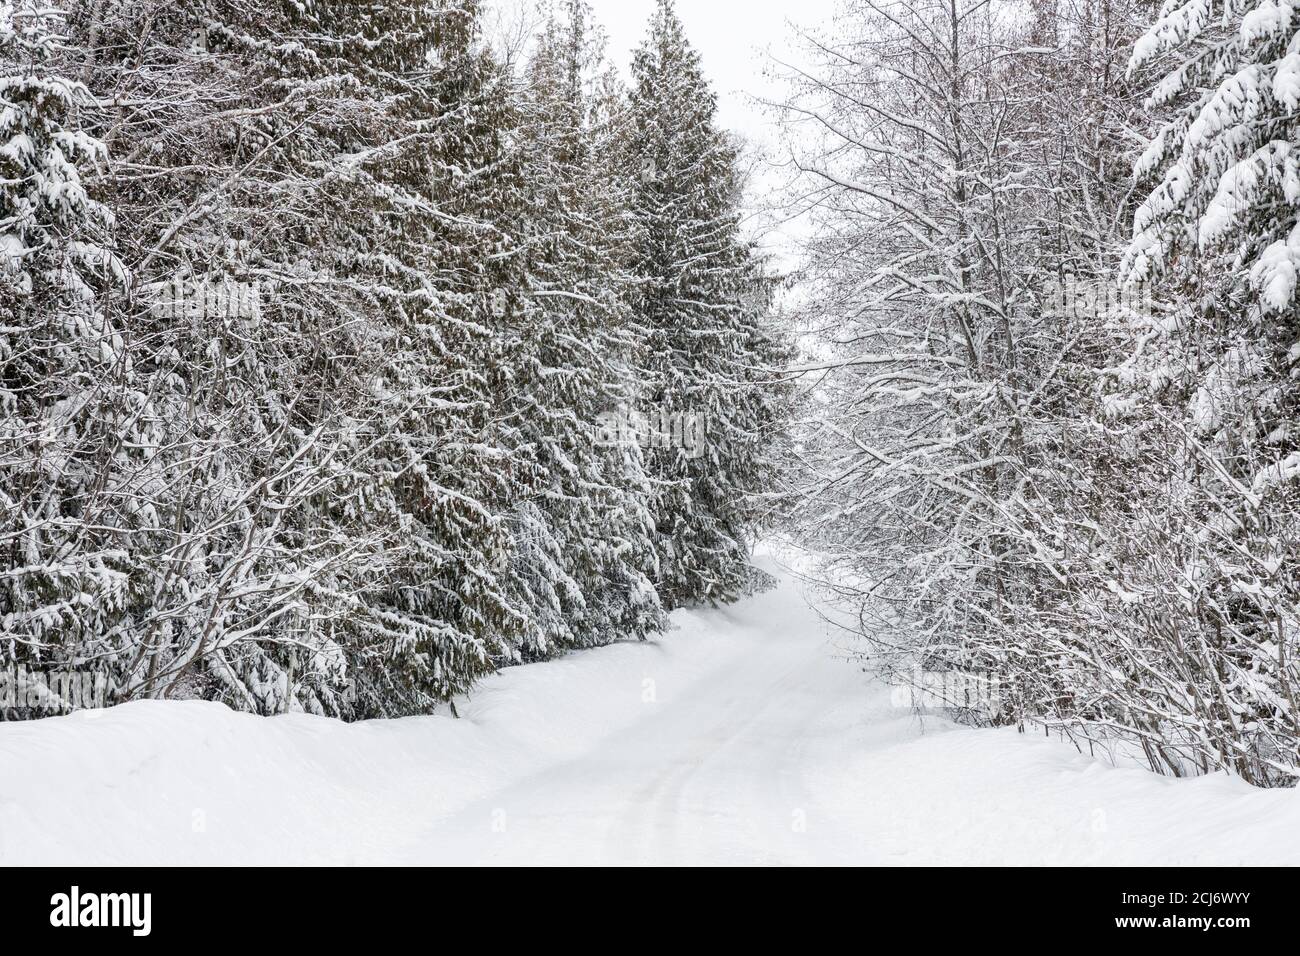 Fresh snow on conifers lining a country road, Vernon, British Columbia, Canada. Stock Photo